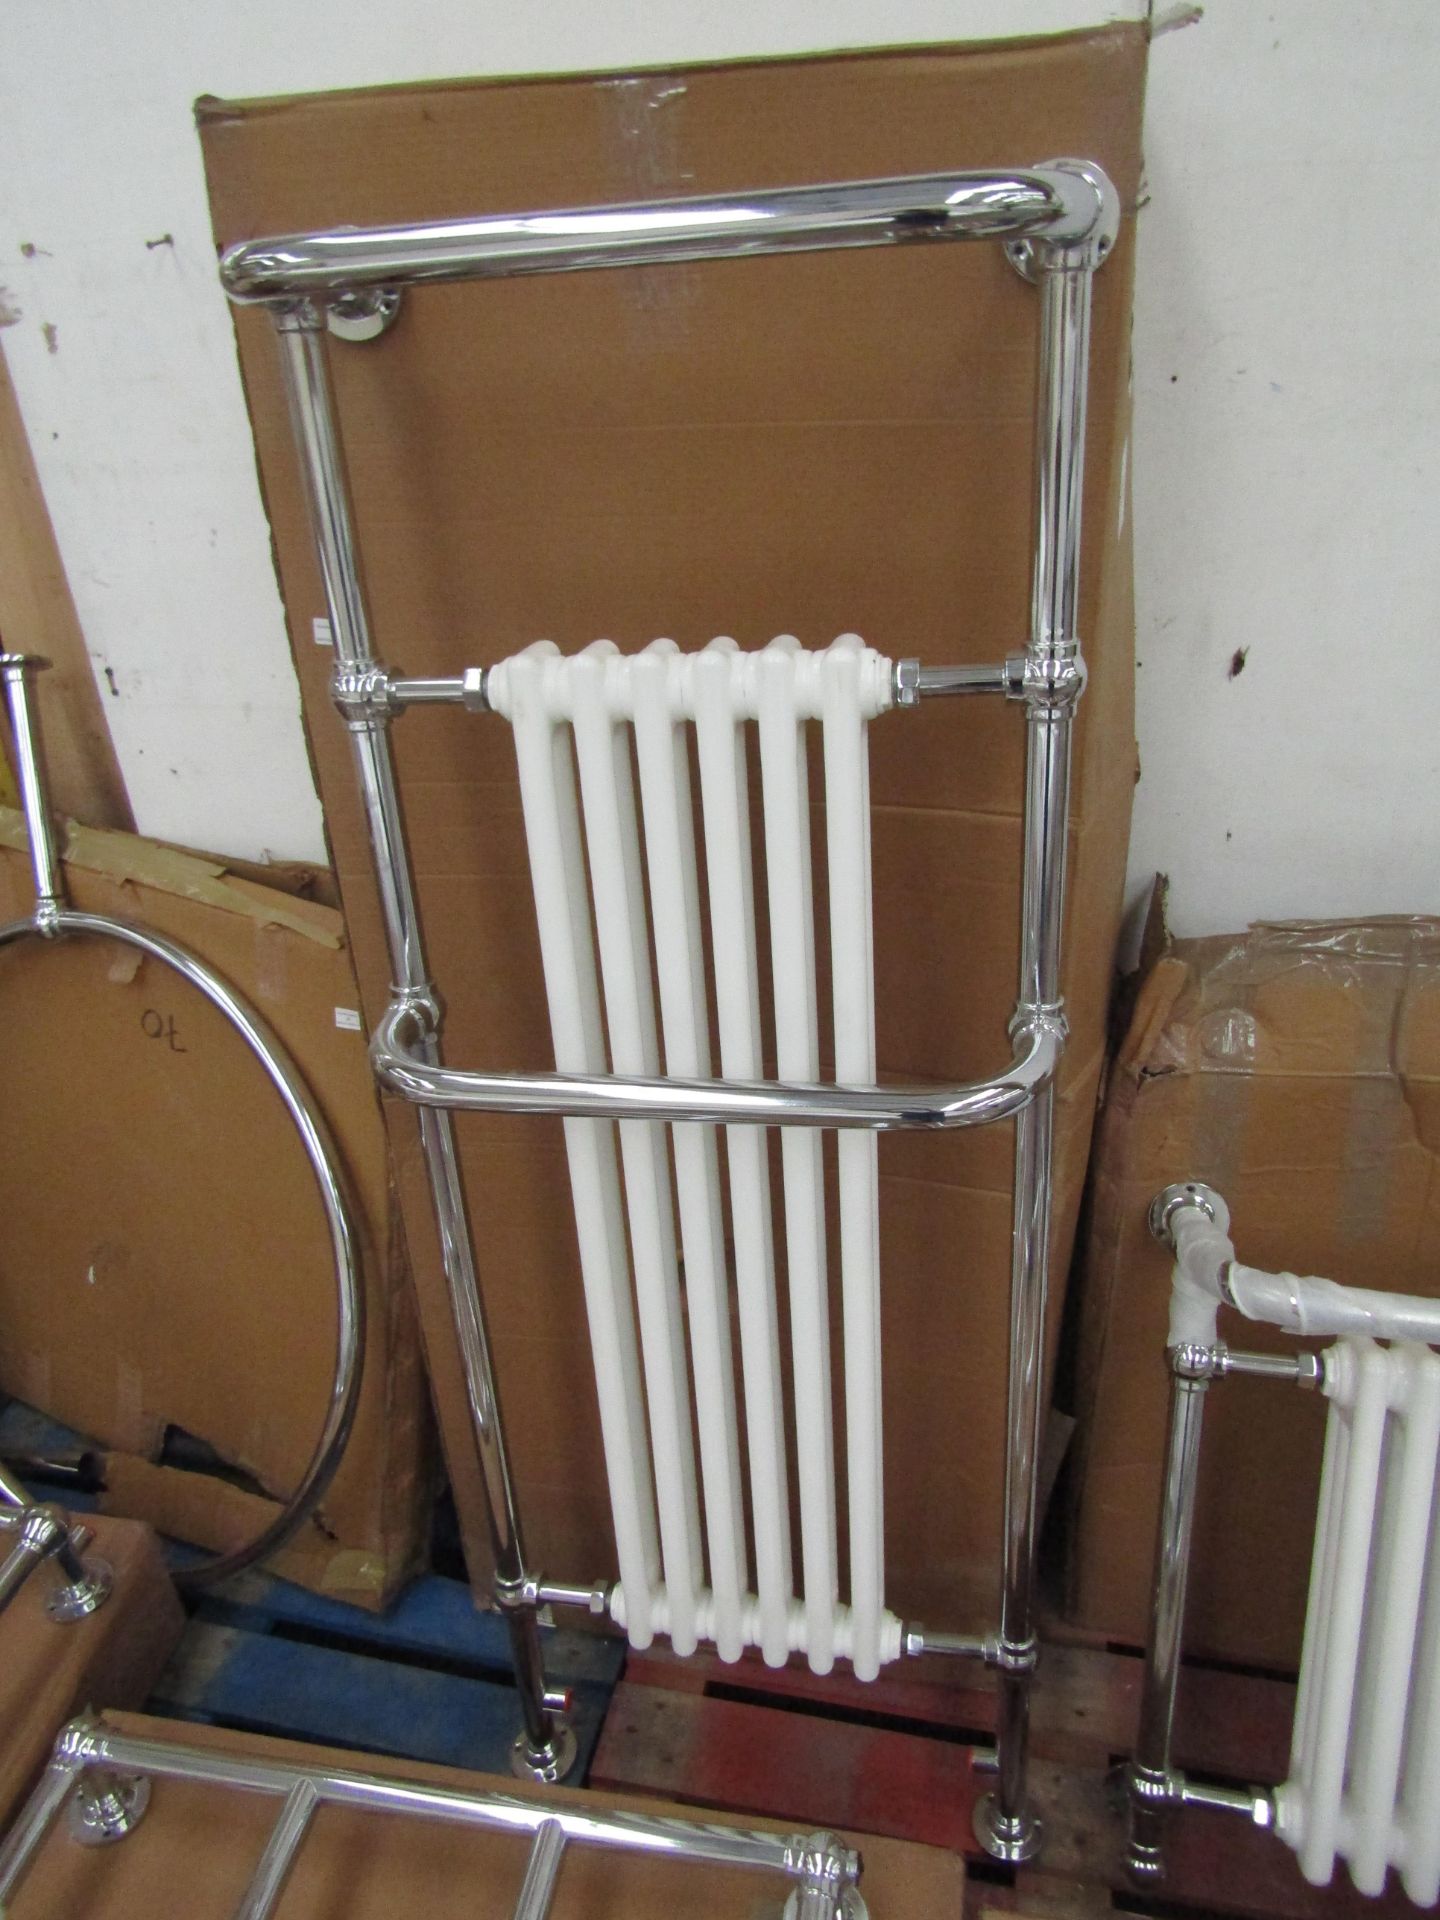 Old London Hazel 6 section Traditional radiator, boxed and unchecked, measure 1490mm x 240 x 540